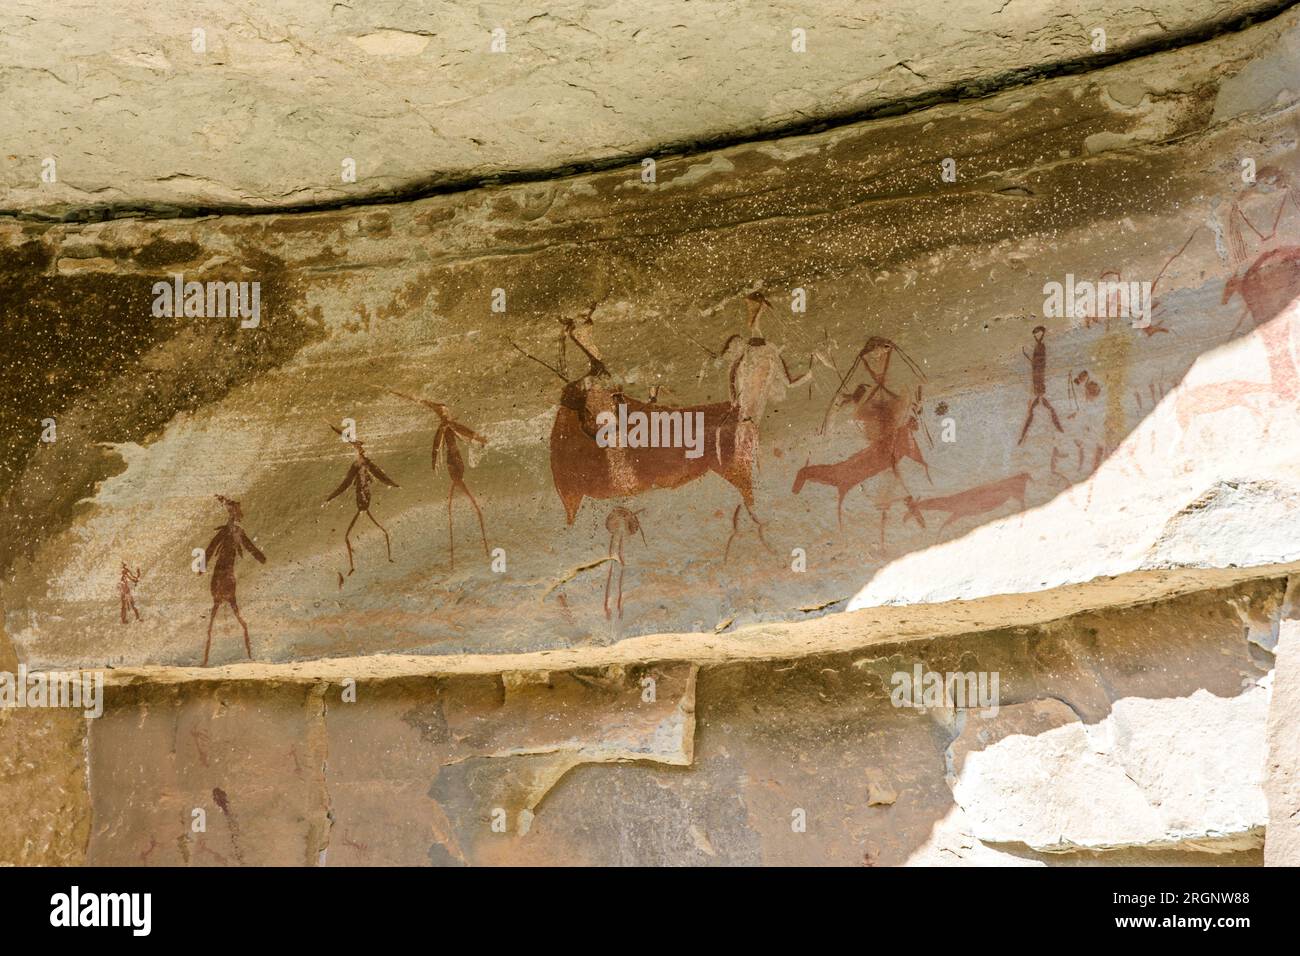 Rock art images in the Injisuthi Battle Cave in the Giants Castle area in the Drakensberg mountains in South Africa Stock Photo